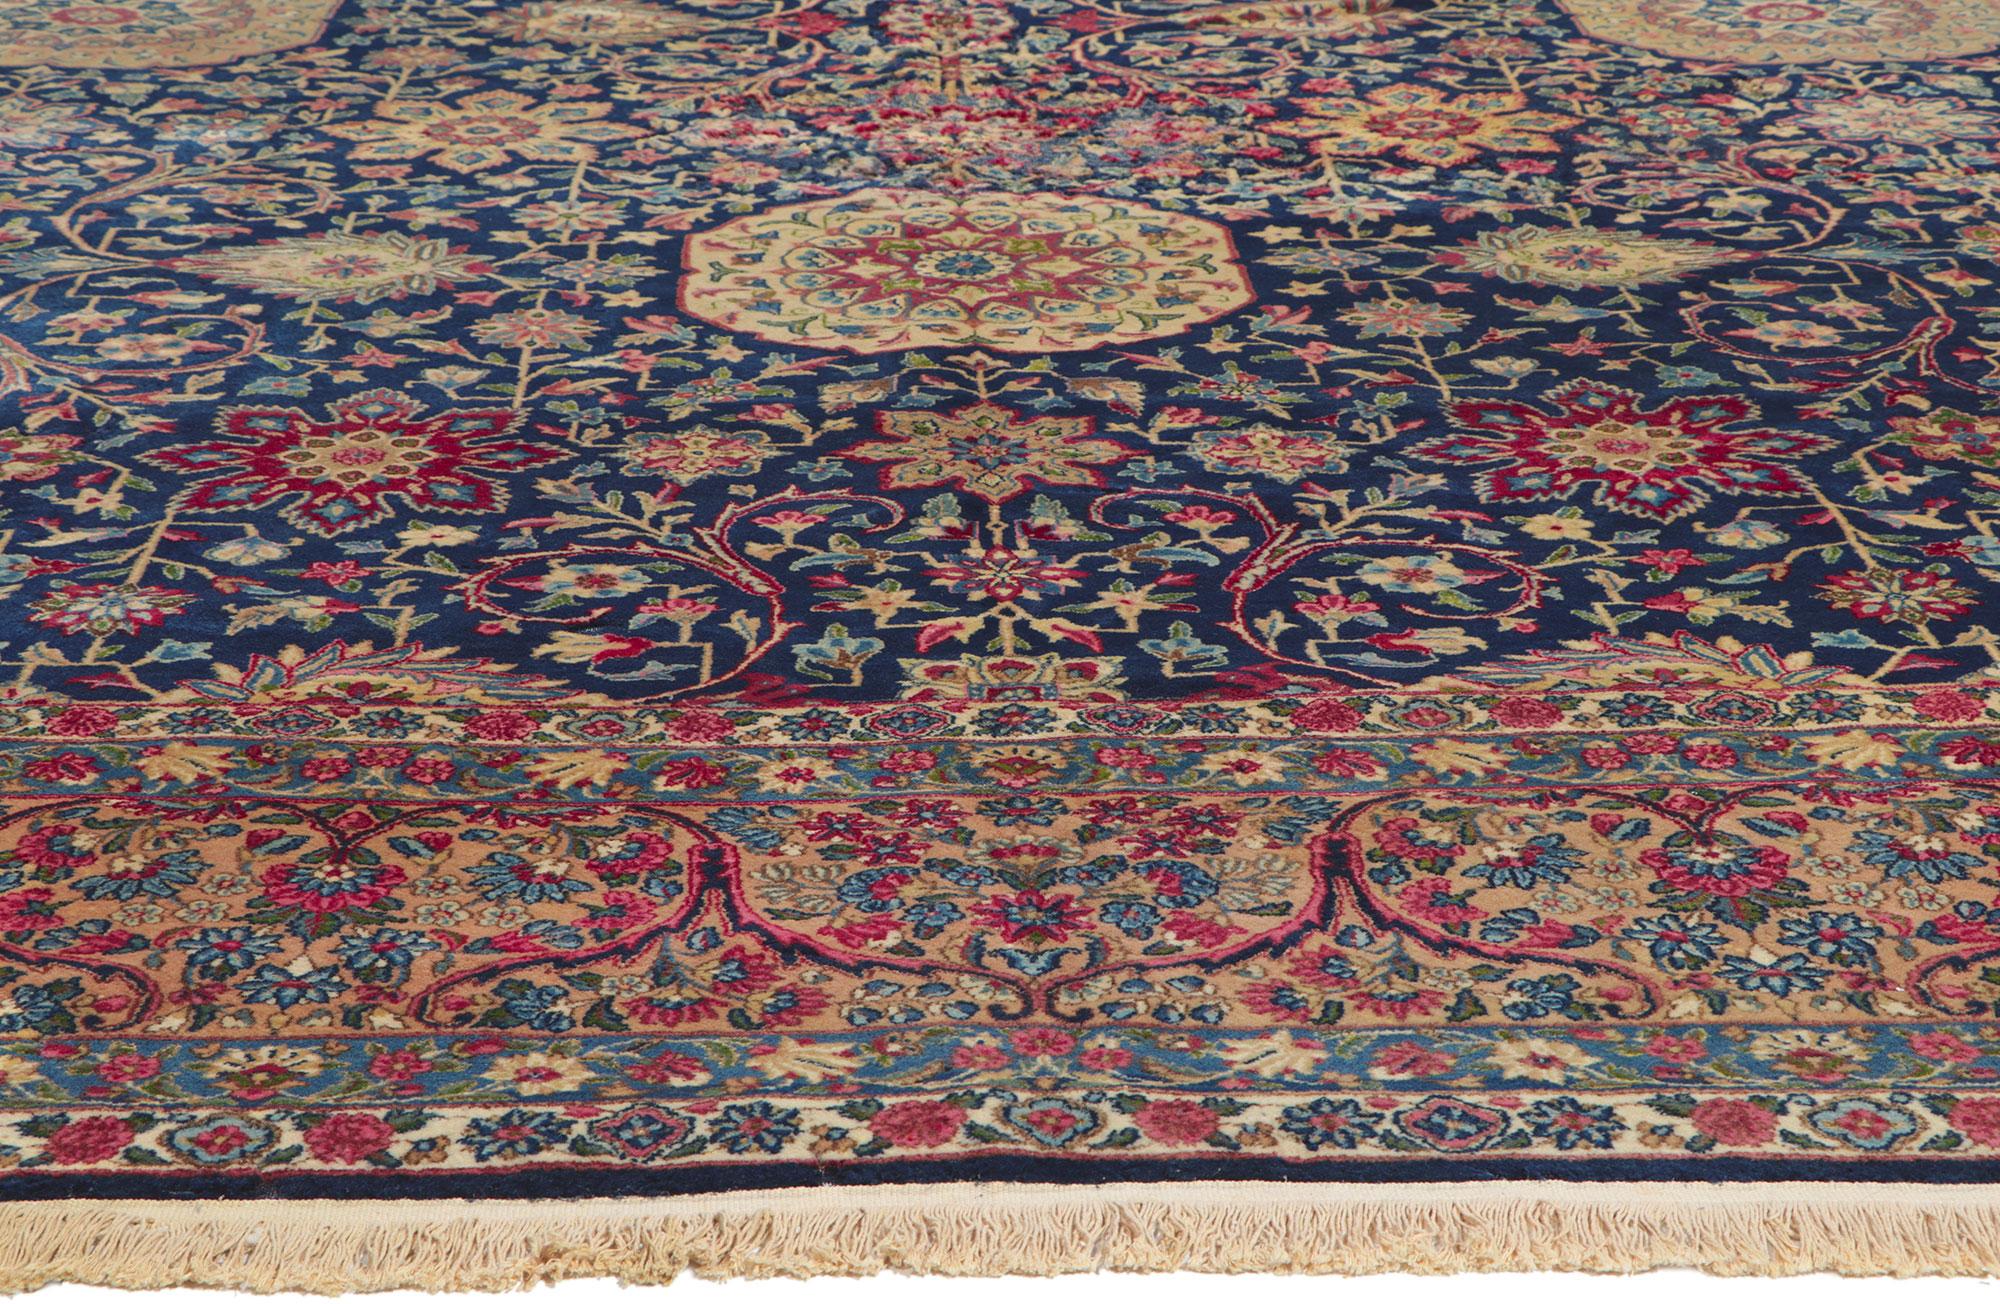 Antique Persian Kerman Rug Hotel Lobby Size Carpet In Good Condition For Sale In Dallas, TX